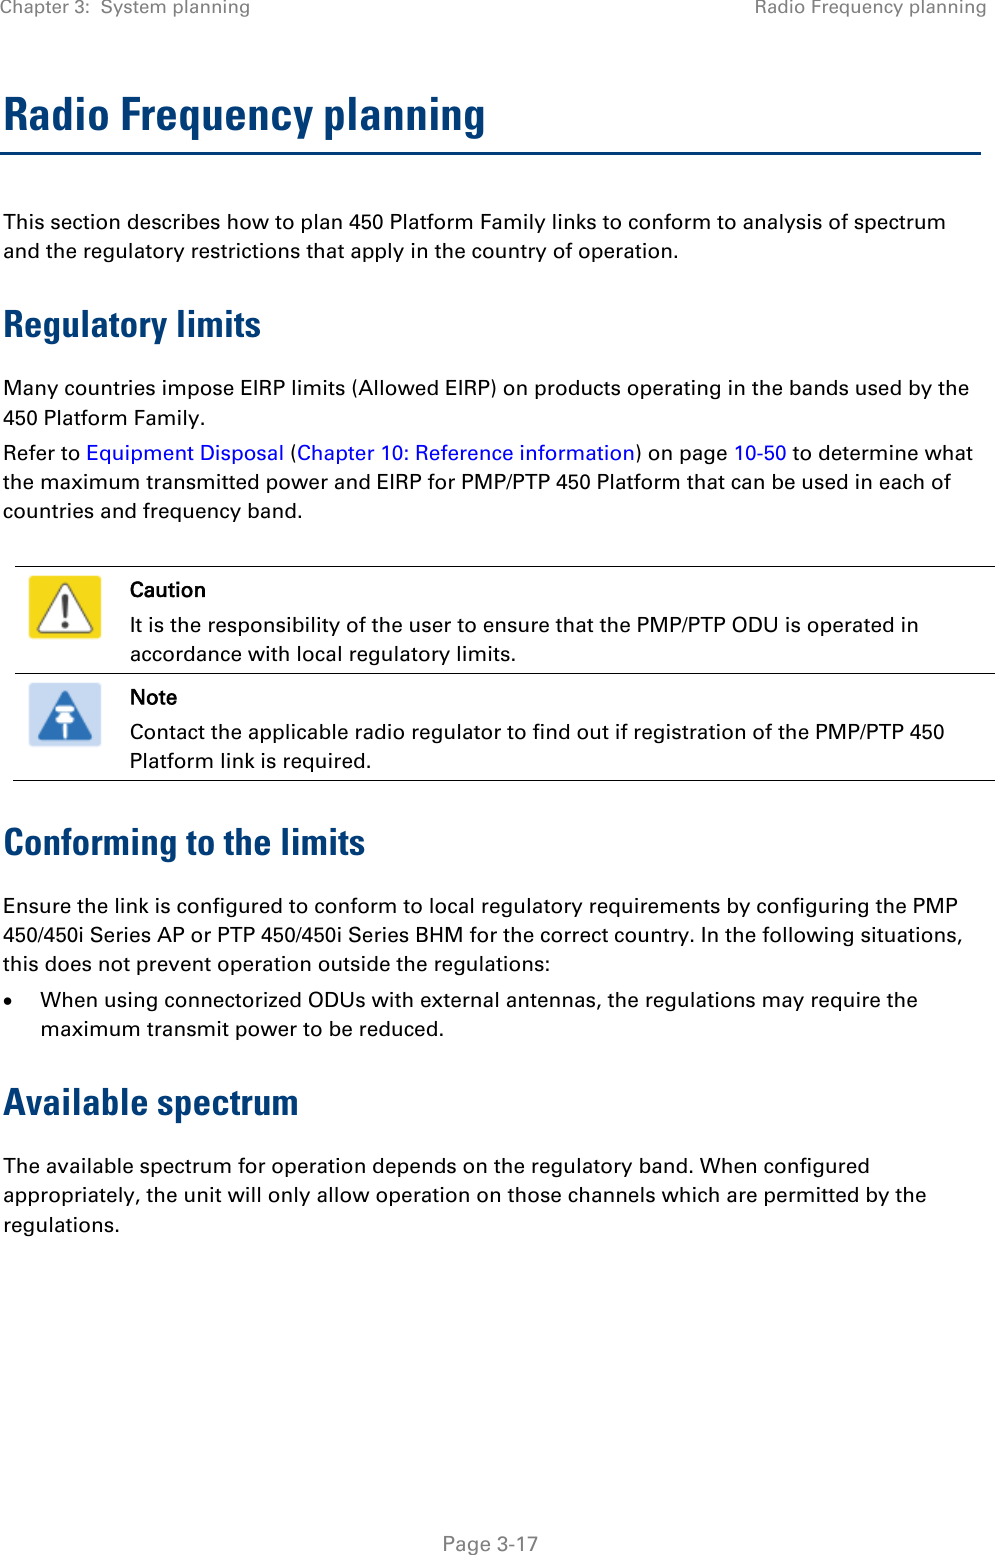 Chapter 3:  System planning Radio Frequency planning   Page 3-17 Radio Frequency planning This section describes how to plan 450 Platform Family links to conform to analysis of spectrum and the regulatory restrictions that apply in the country of operation. Regulatory limits Many countries impose EIRP limits (Allowed EIRP) on products operating in the bands used by the 450 Platform Family.  Refer to Equipment Disposal (Chapter 10: Reference information) on page 10-50 to determine what the maximum transmitted power and EIRP for PMP/PTP 450 Platform that can be used in each of countries and frequency band.   Caution It is the responsibility of the user to ensure that the PMP/PTP ODU is operated in accordance with local regulatory limits.  Note Contact the applicable radio regulator to find out if registration of the PMP/PTP 450 Platform link is required. Conforming to the limits Ensure the link is configured to conform to local regulatory requirements by configuring the PMP 450/450i Series AP or PTP 450/450i Series BHM for the correct country. In the following situations, this does not prevent operation outside the regulations: • When using connectorized ODUs with external antennas, the regulations may require the maximum transmit power to be reduced. Available spectrum The available spectrum for operation depends on the regulatory band. When configured appropriately, the unit will only allow operation on those channels which are permitted by the regulations.     